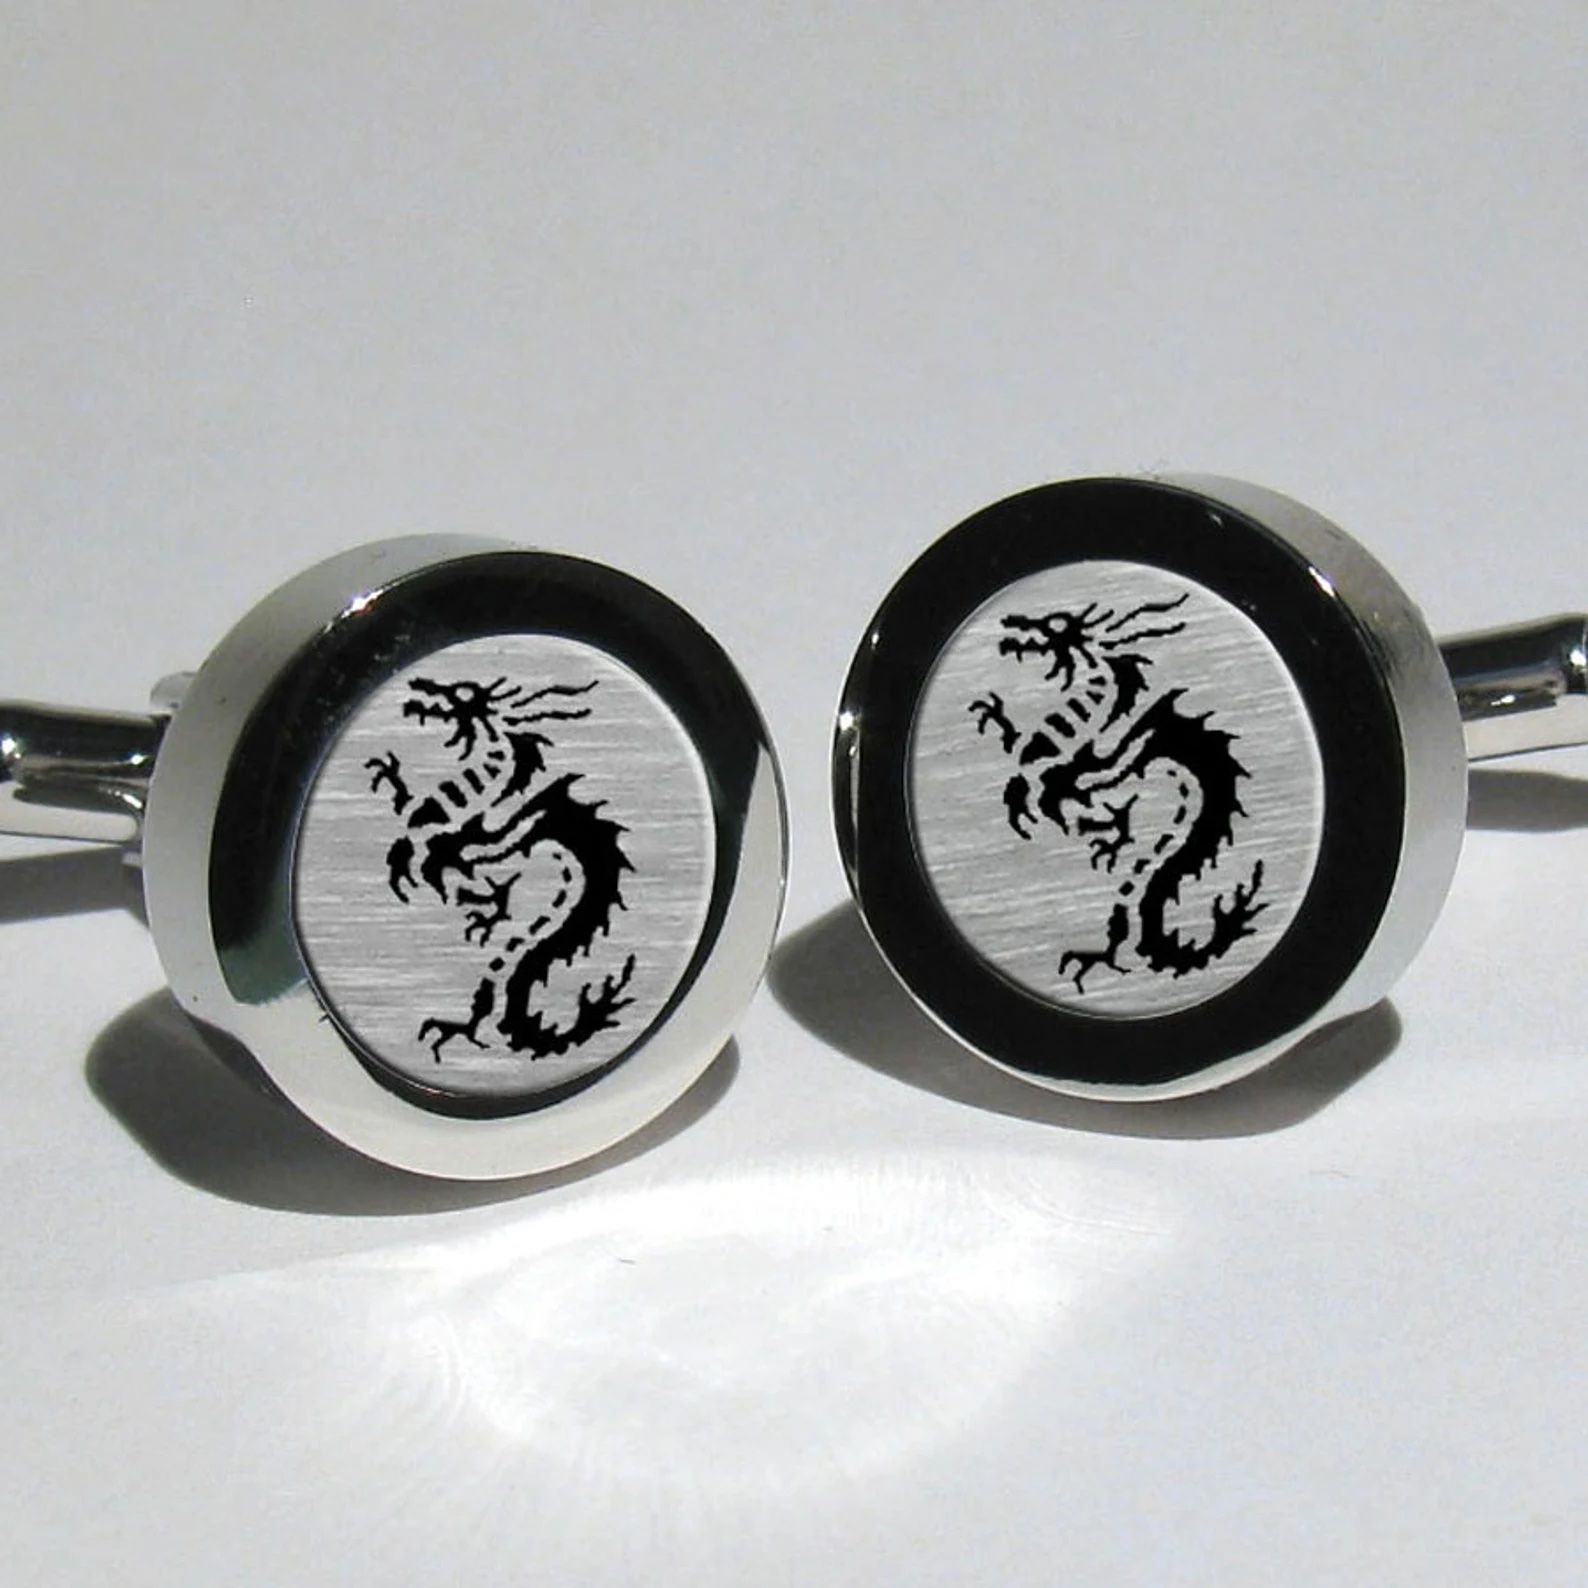 Silver and black cufflinks with dragons on them.